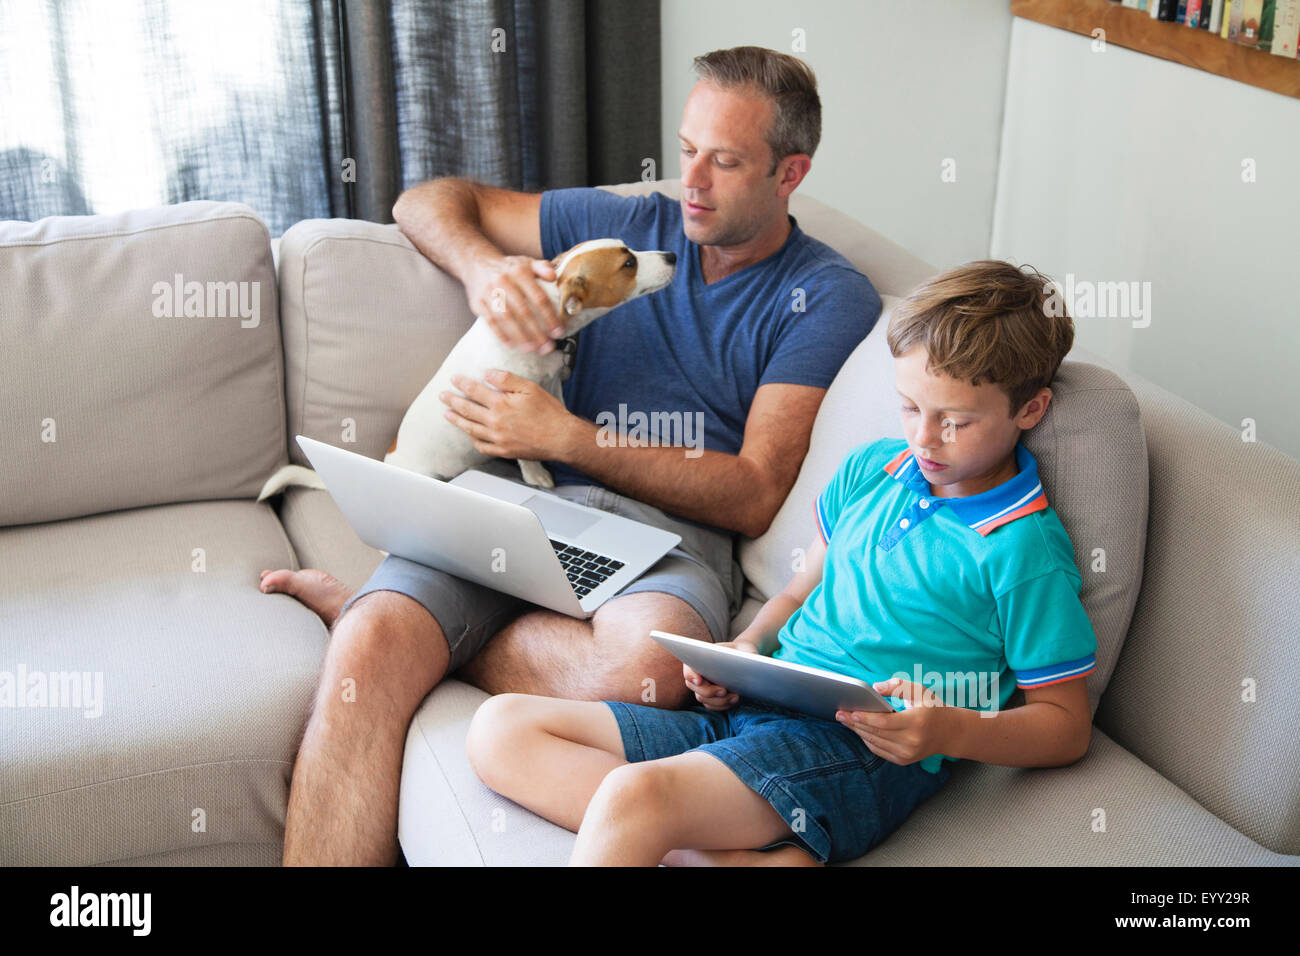 Caucasian father and son using technology on sofa Stock Photo